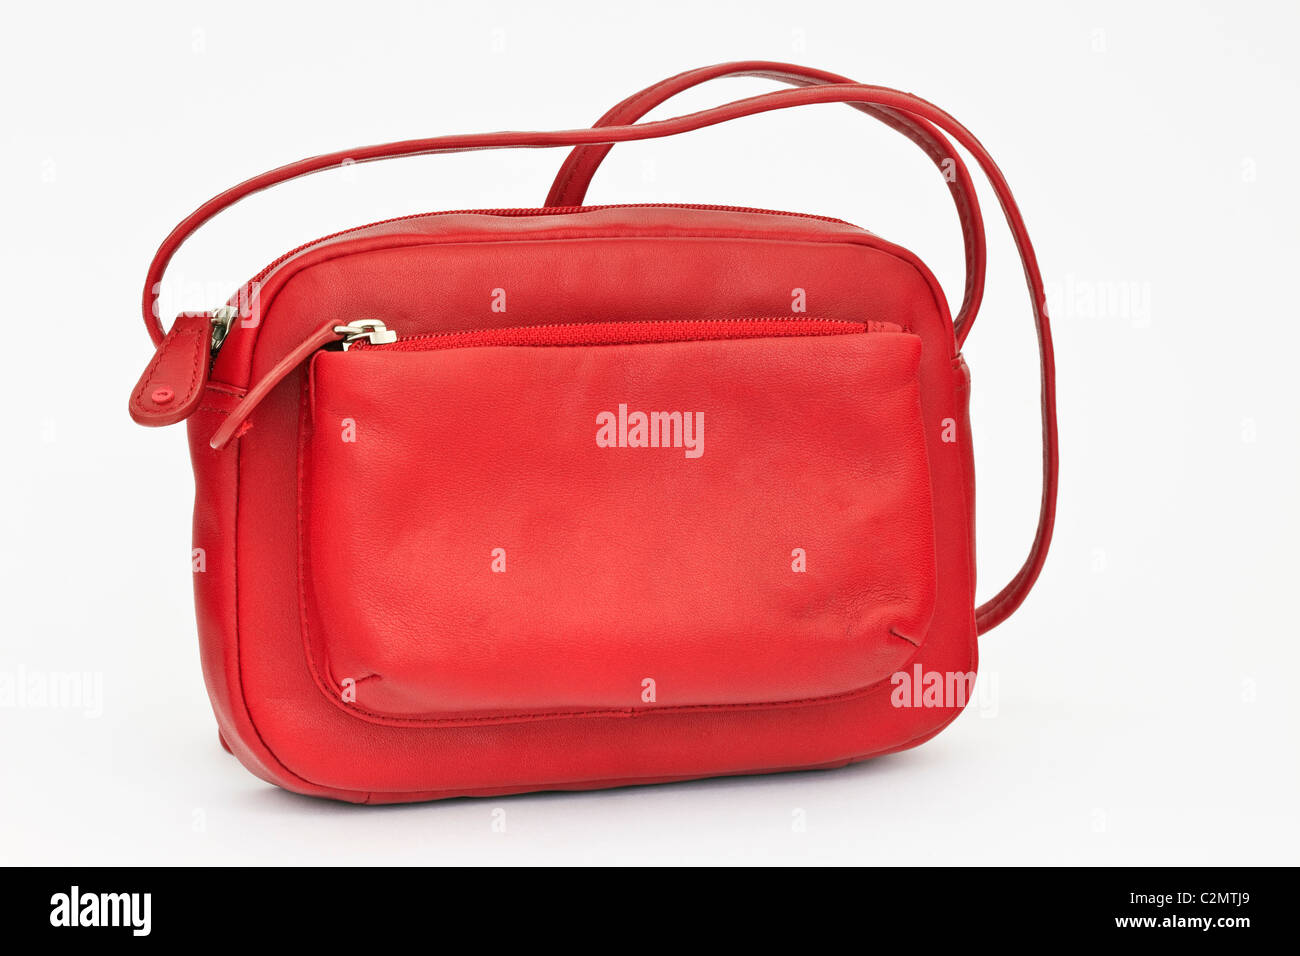 Red leather handbag with zipped compartment and shoulder strap on a plain white background Stock Photo